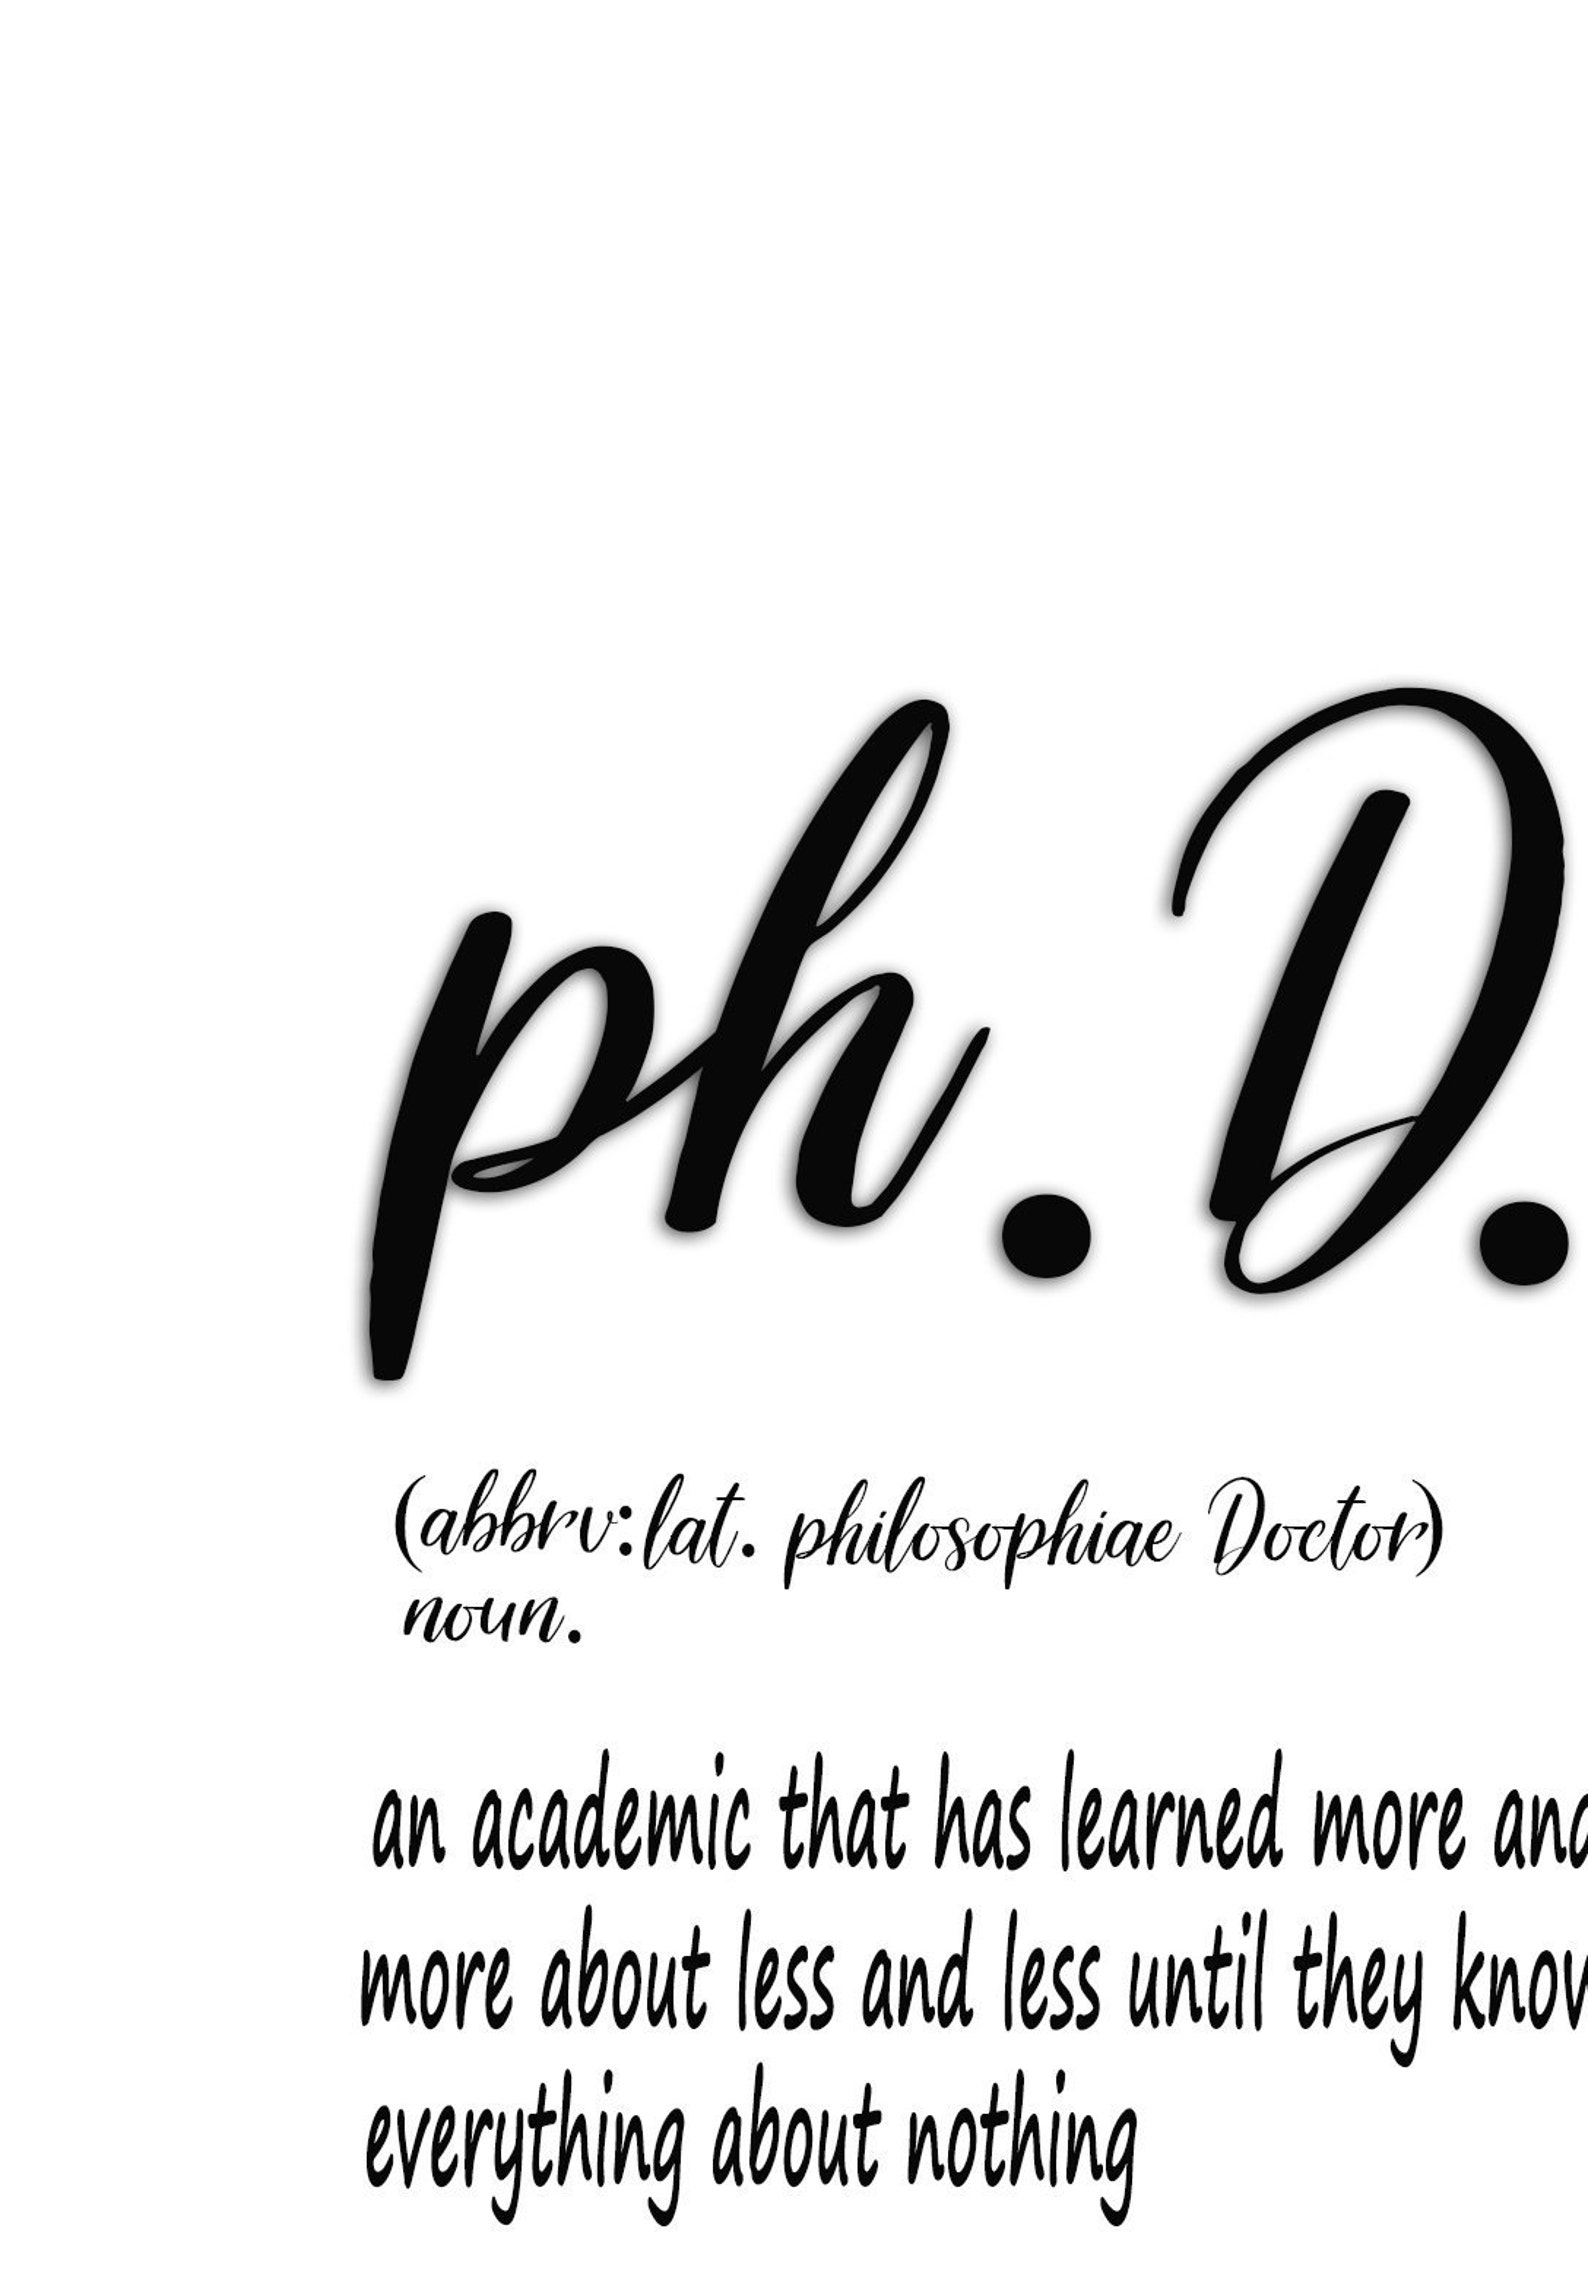 phd meaning dirty